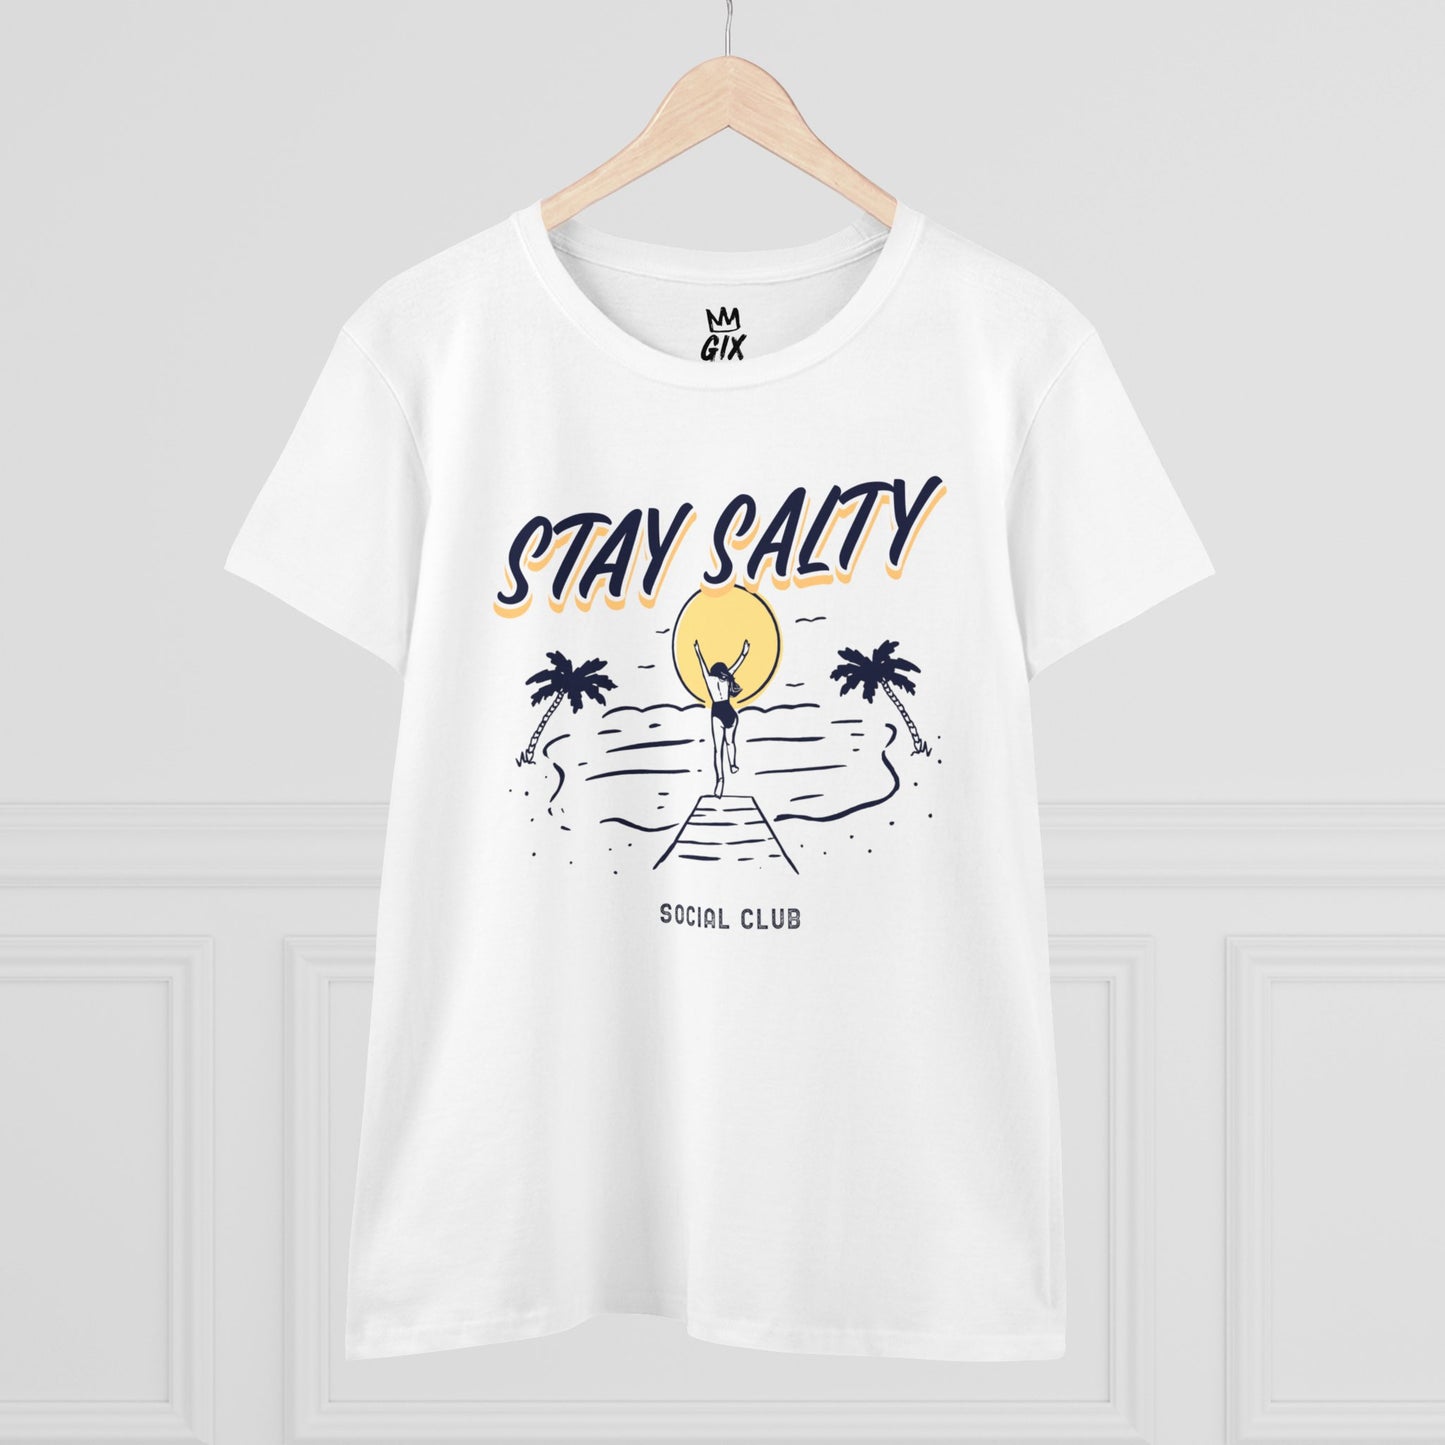 Stay Salty Women's Beach T-Shirt - 100% Cotton, Semi-Fitted, Soft and Comfy